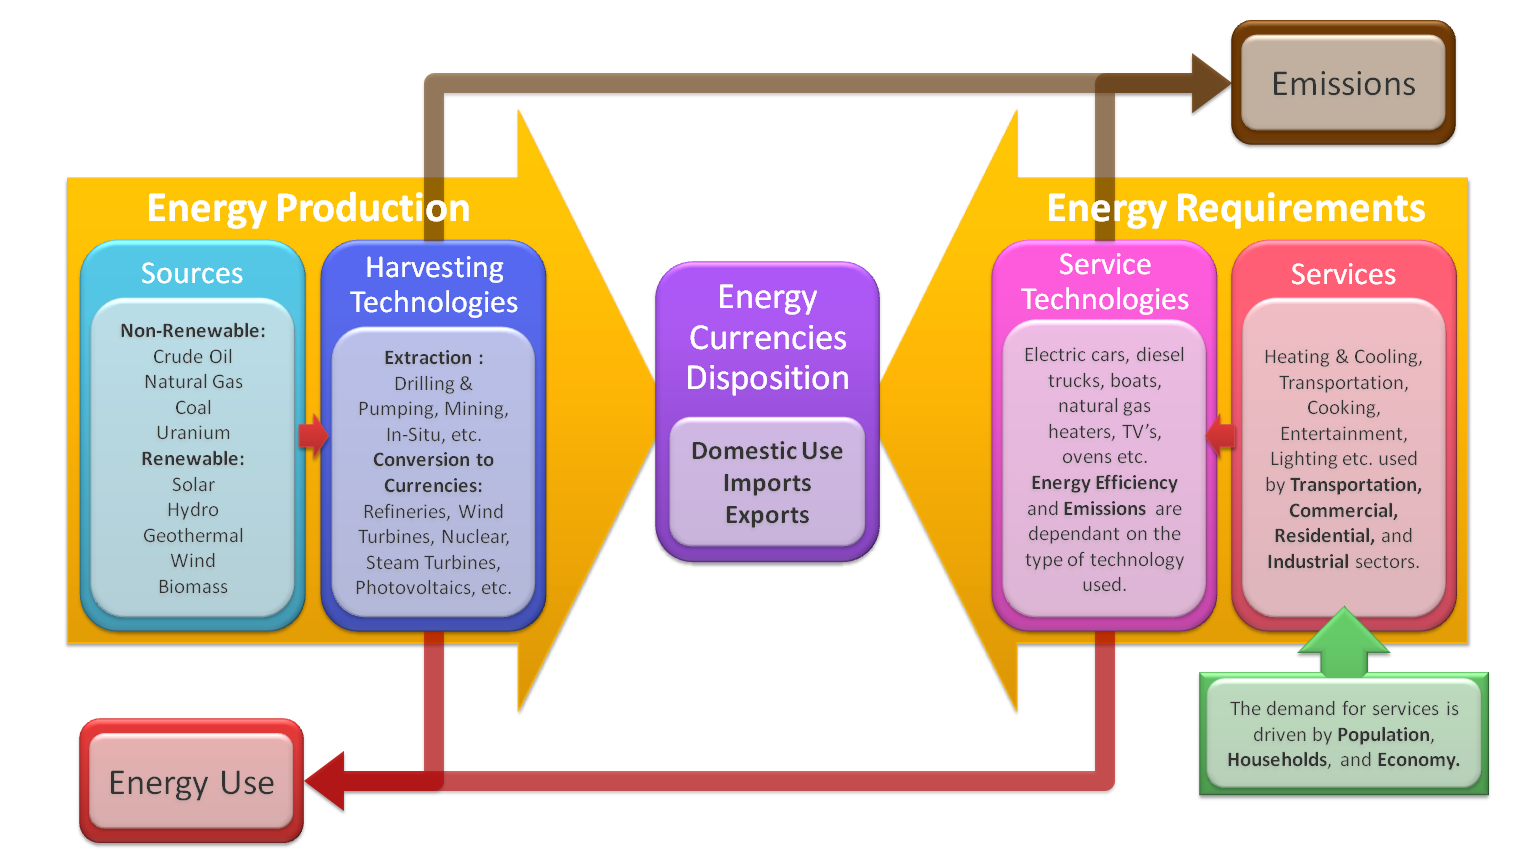 Conceptual view of energy system